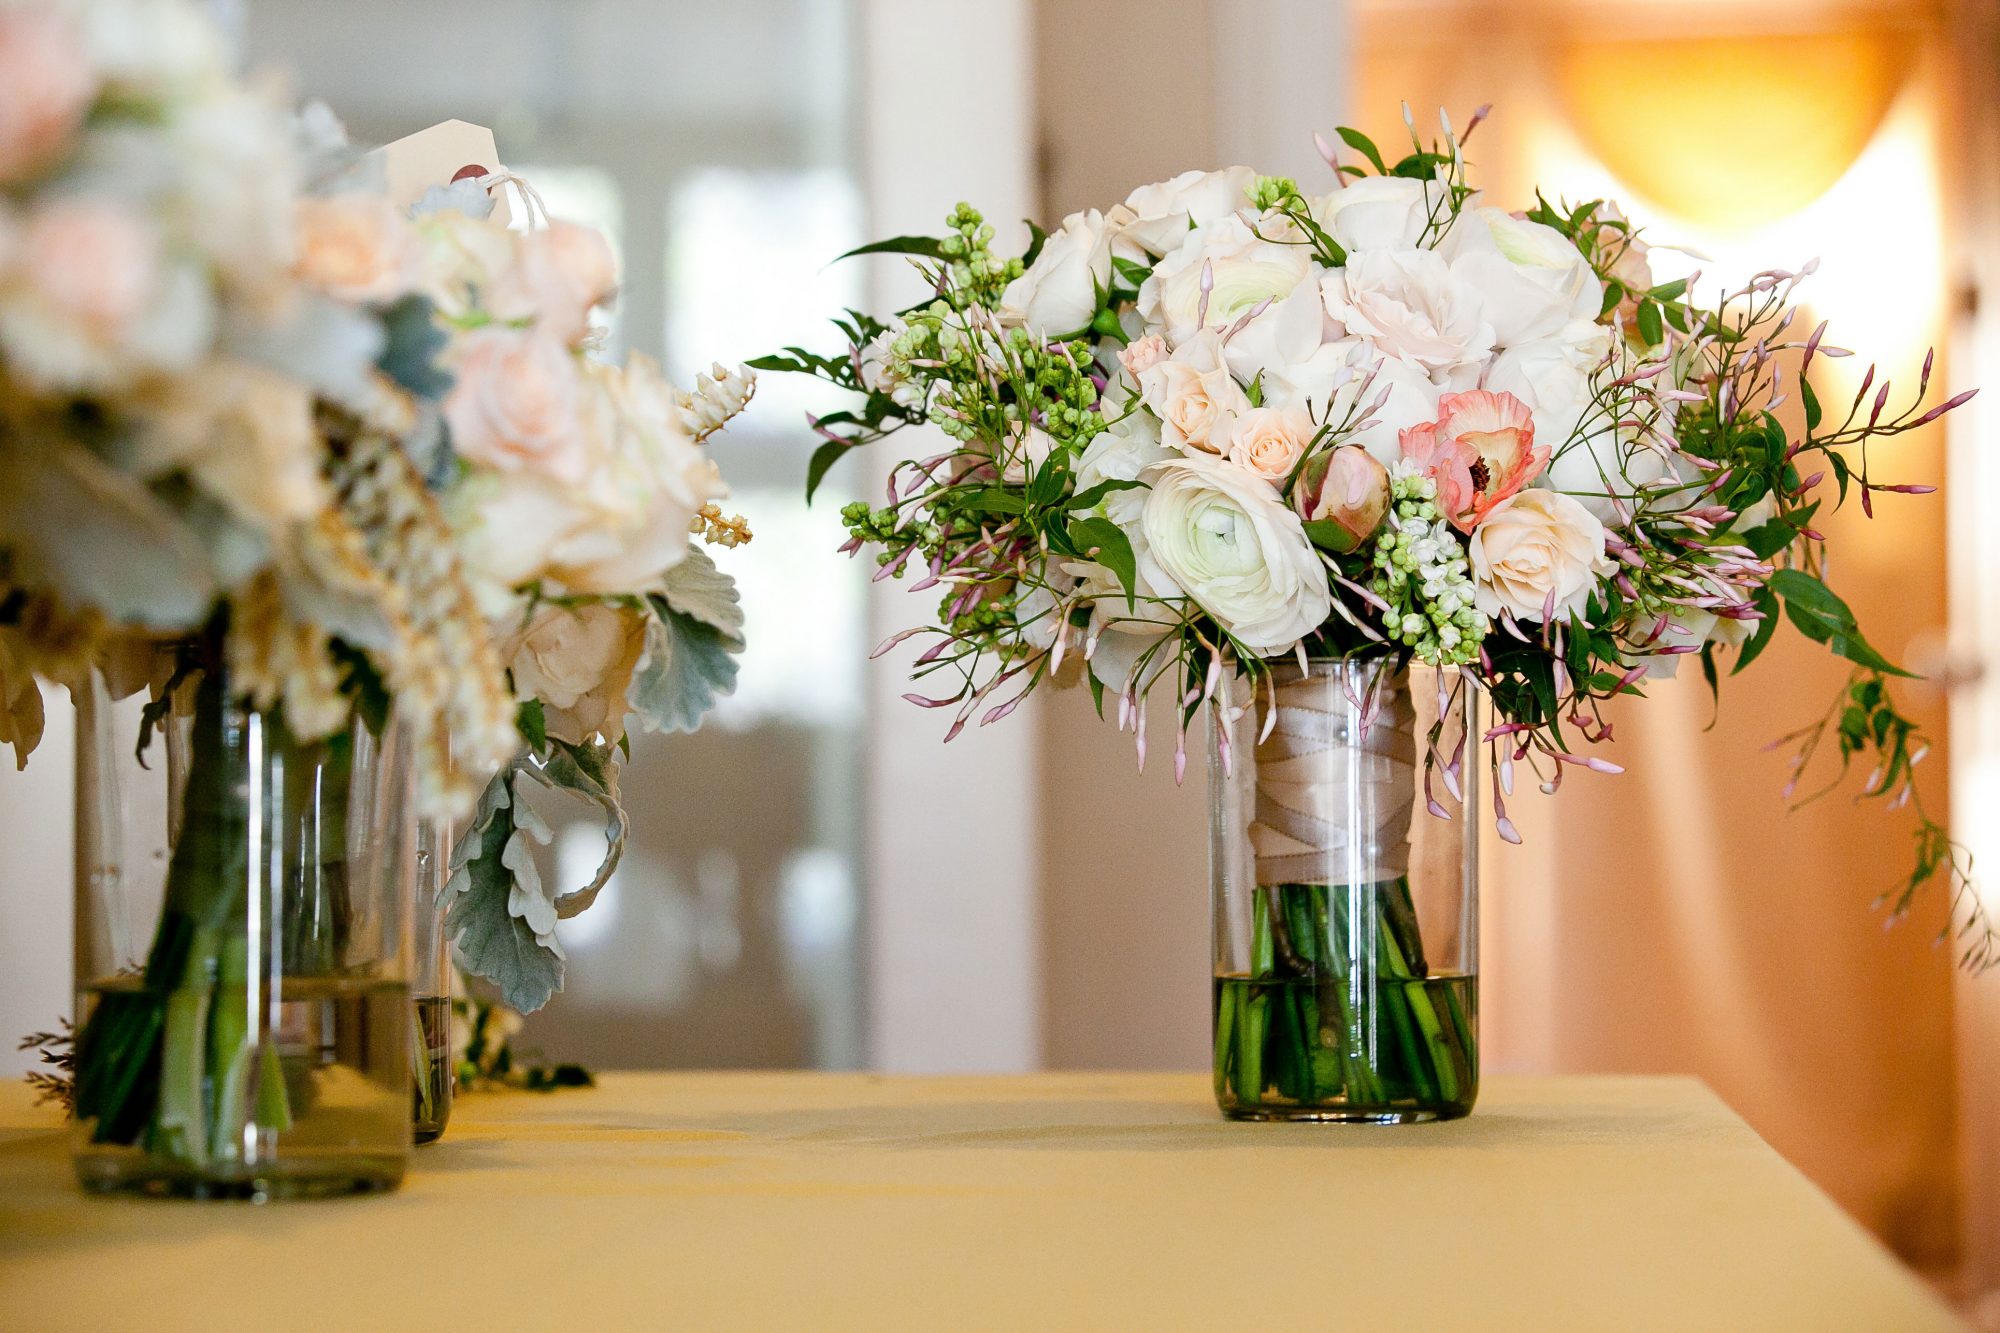 How to Choose Your Wedding Florist